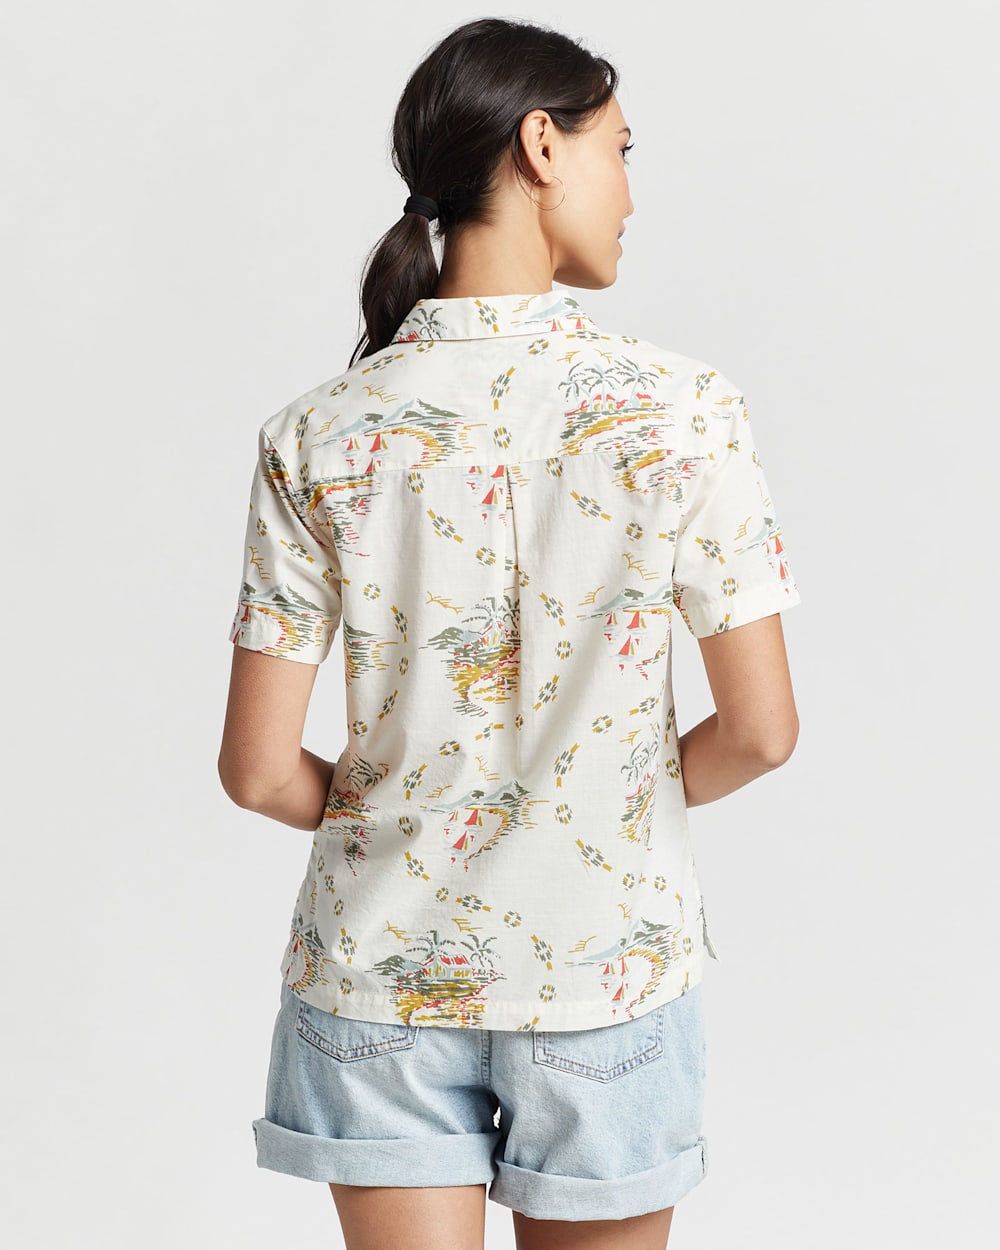 ALTERNATE VIEW OF WOMEN'S SHORT-SLEEVE COTTON CAMP SHIRT IN VINTAGE ISLAND MULTI image number 3